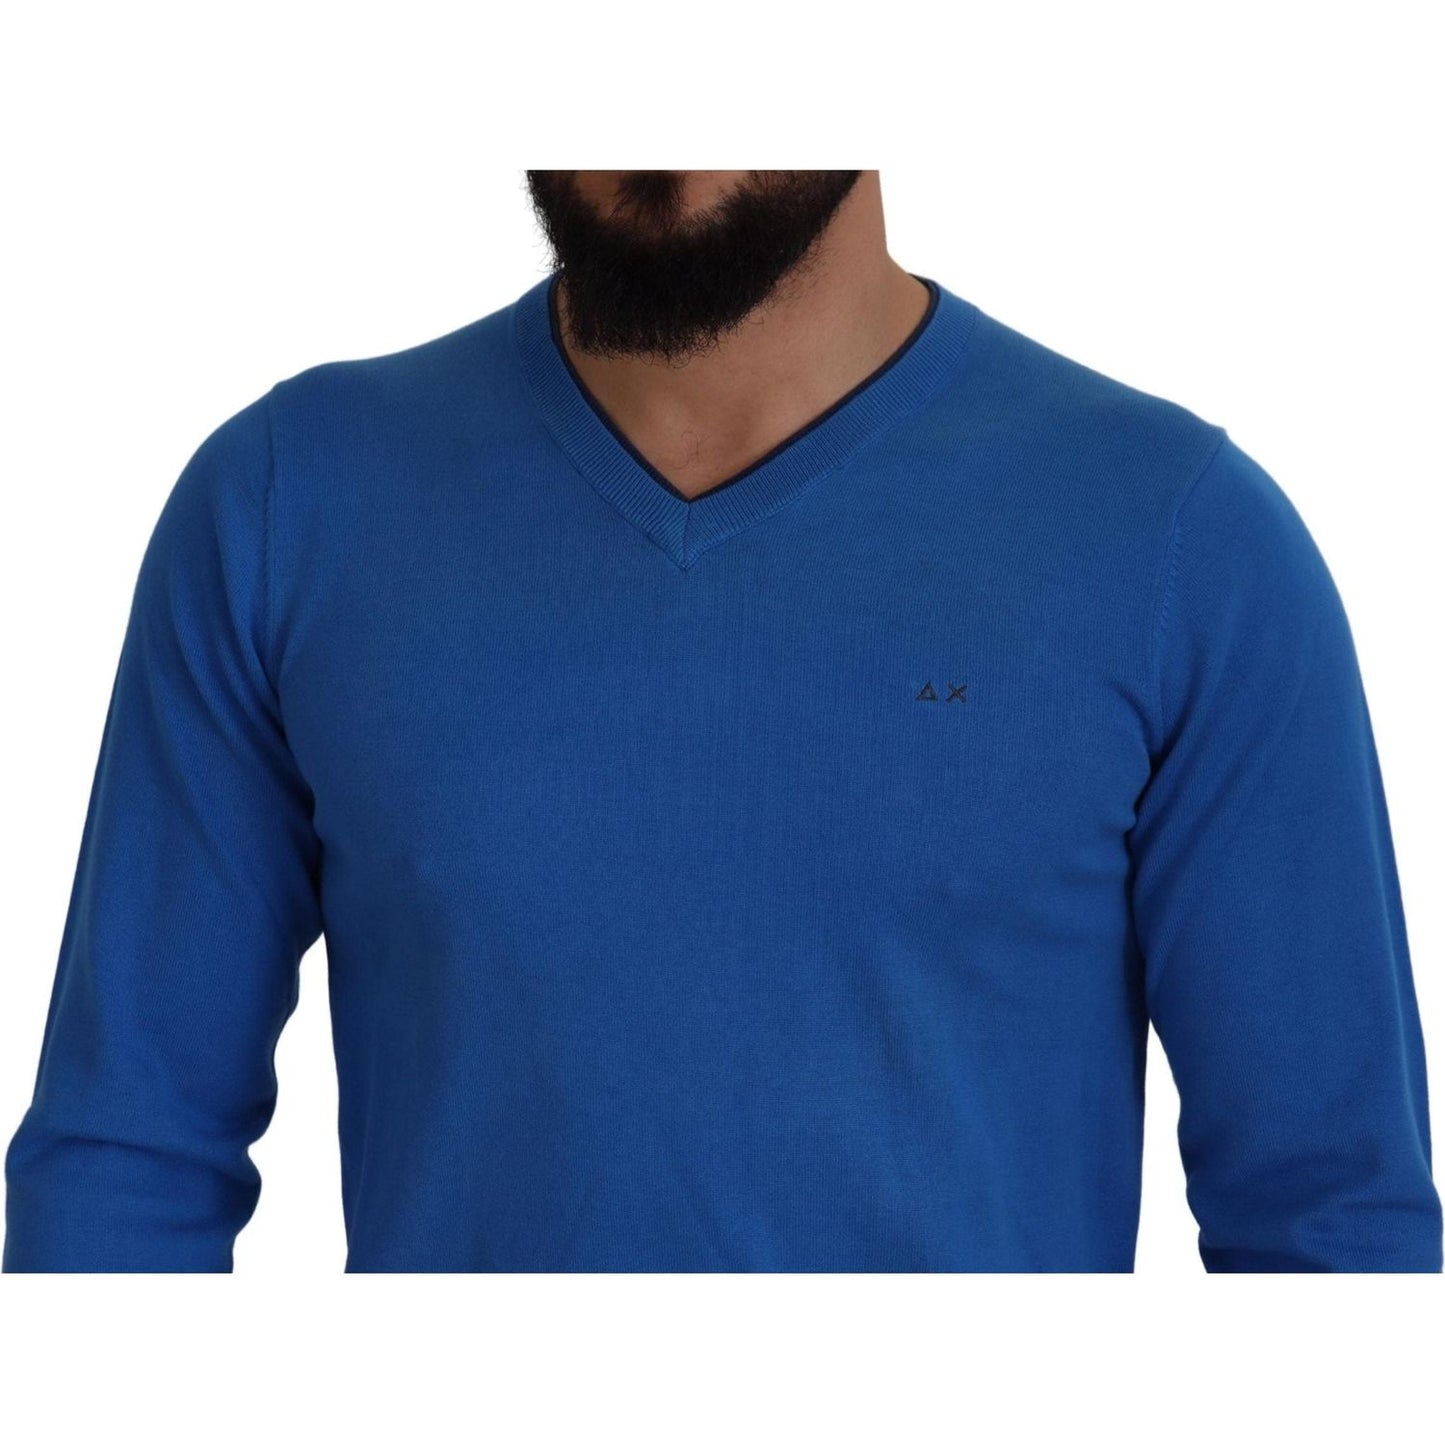 Sun68 Chic Blue Cotton Pullover Sweater blue-cotton-v-neck-knitted-men-pullover-sweater